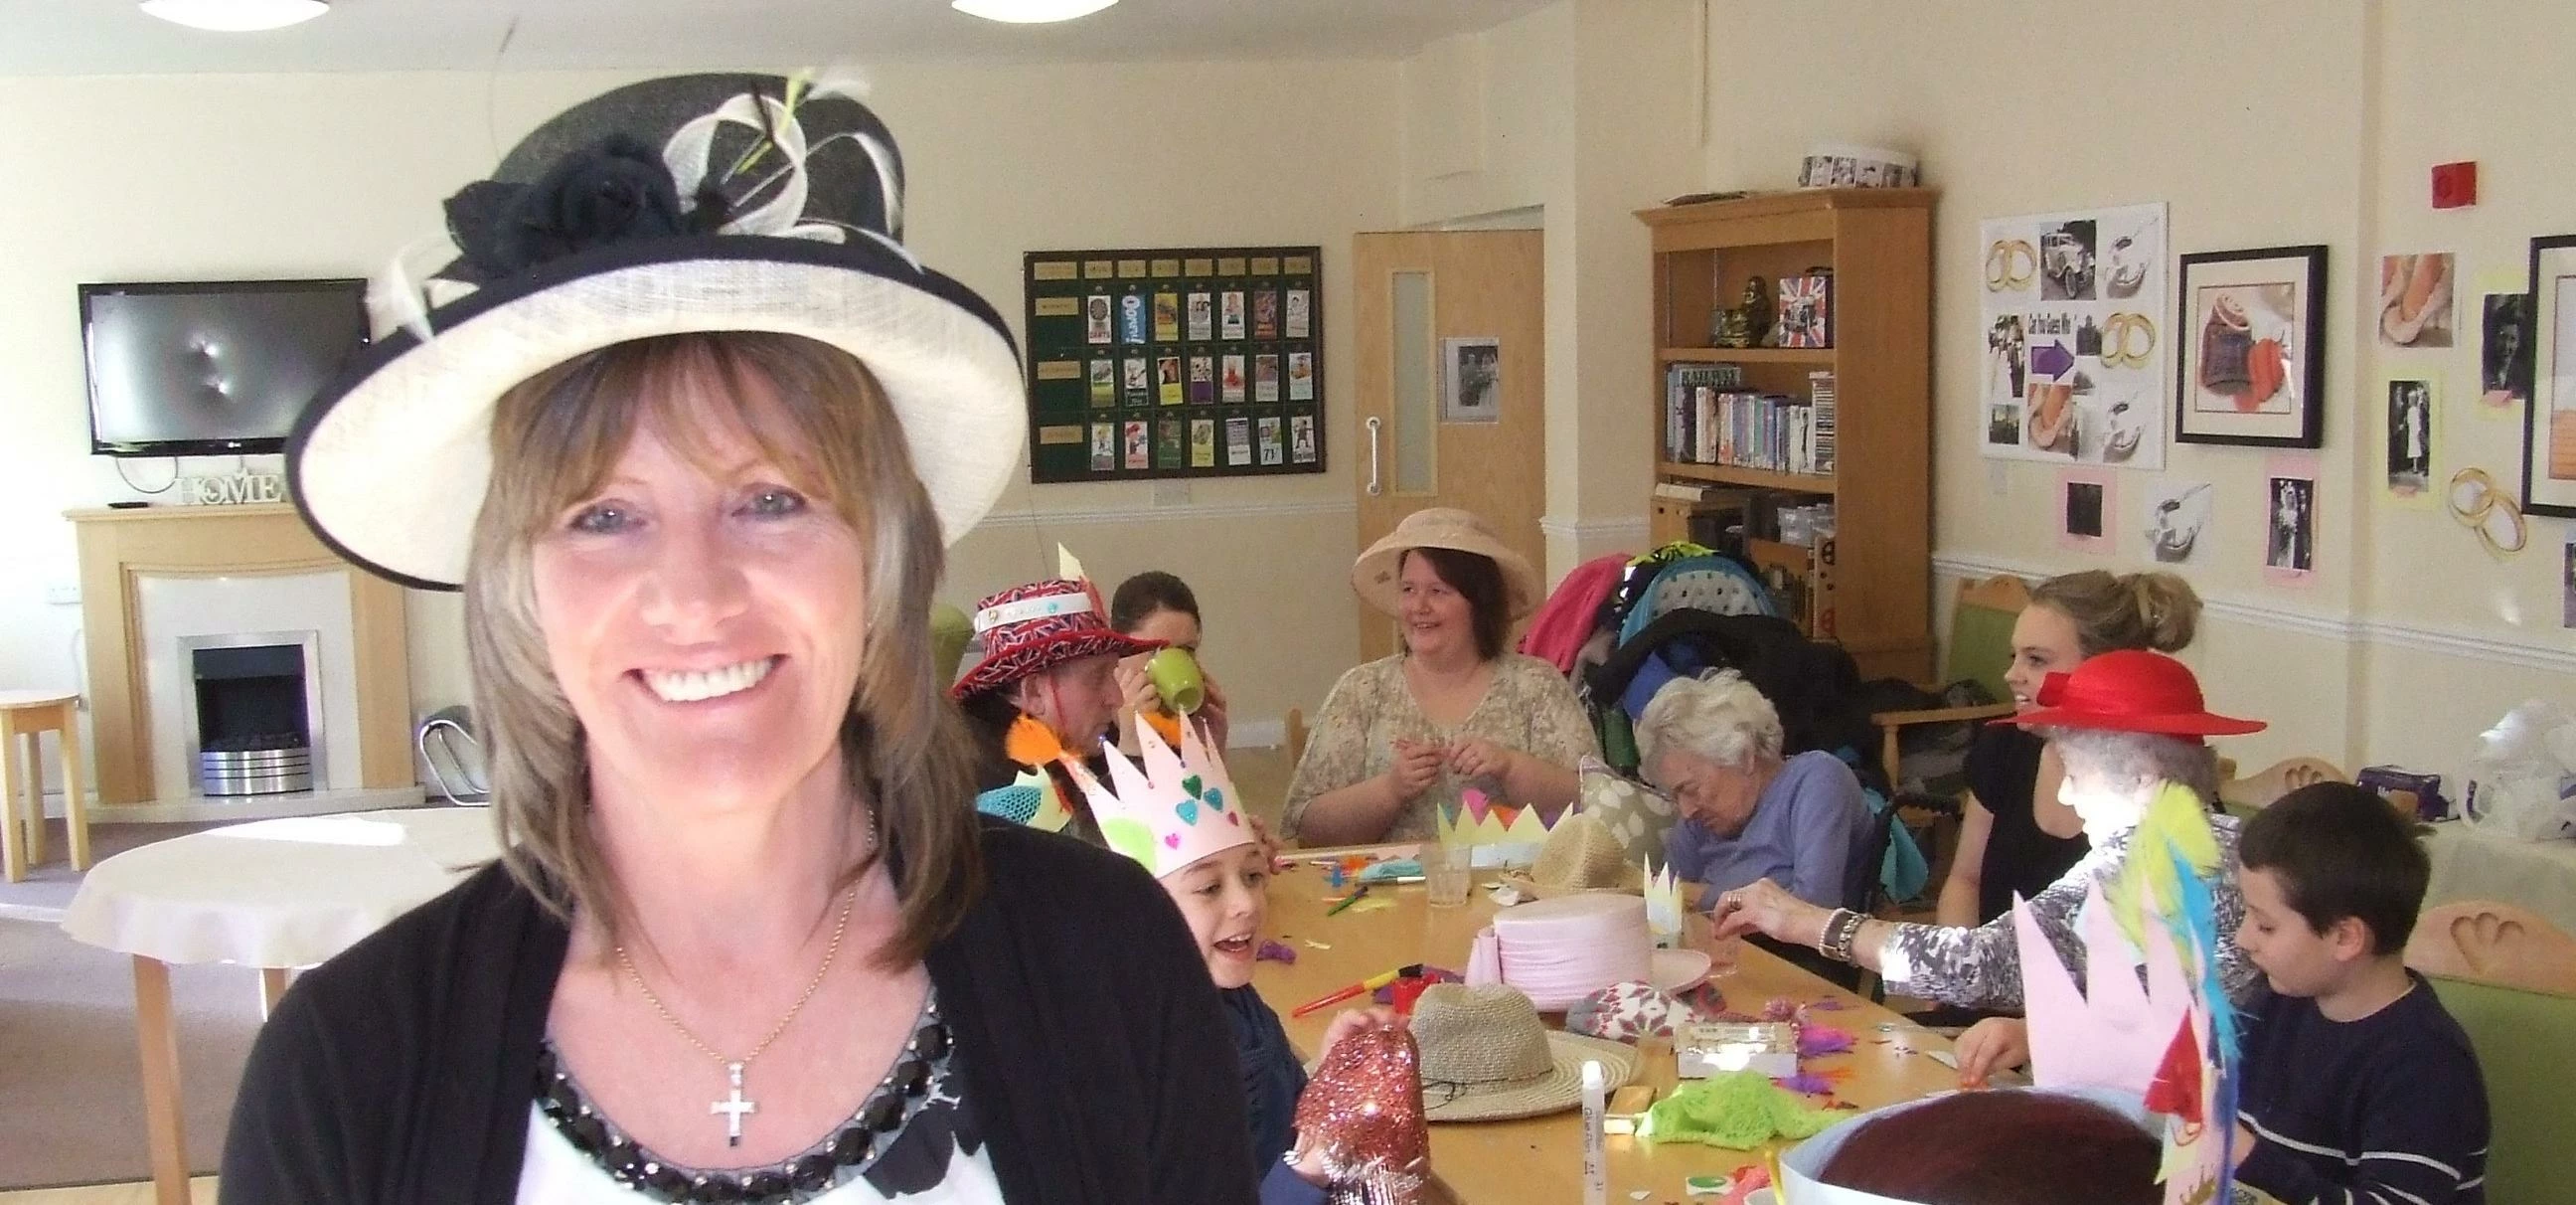 Care home manager Bev Milson with residents and Nicky's childminding 